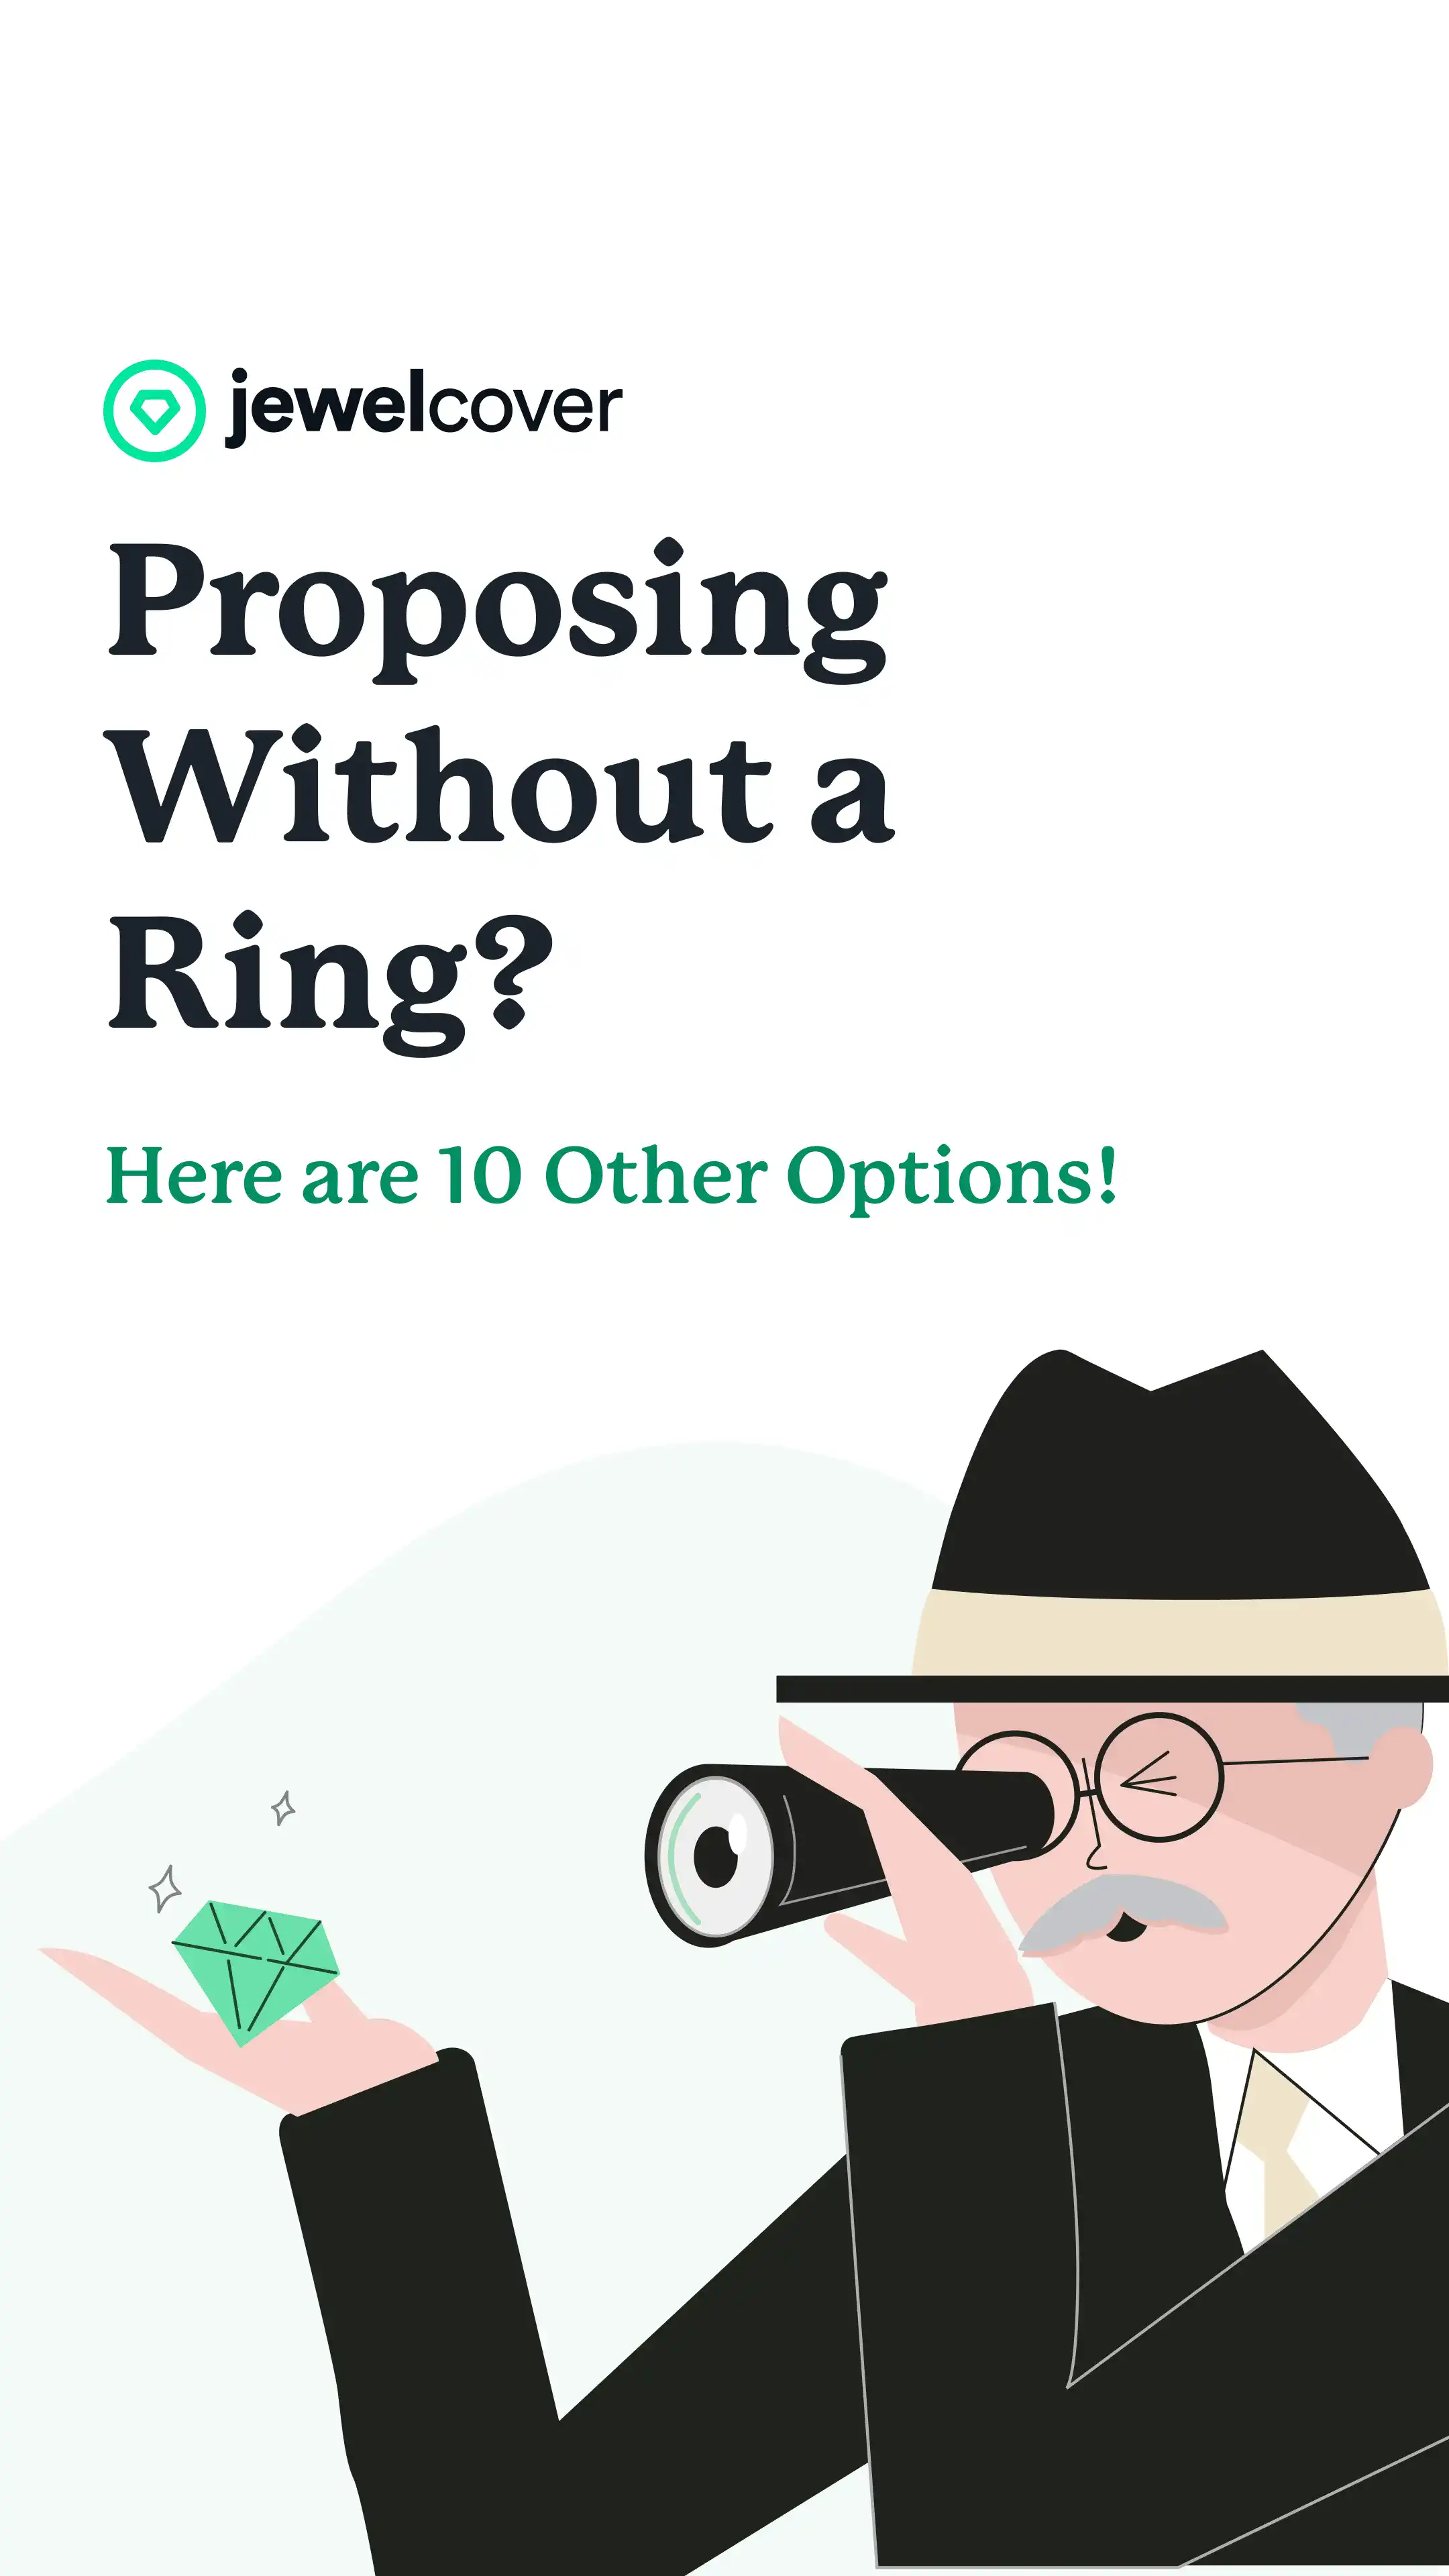 Proposing Without a Ring? Here are 10 Other Options!